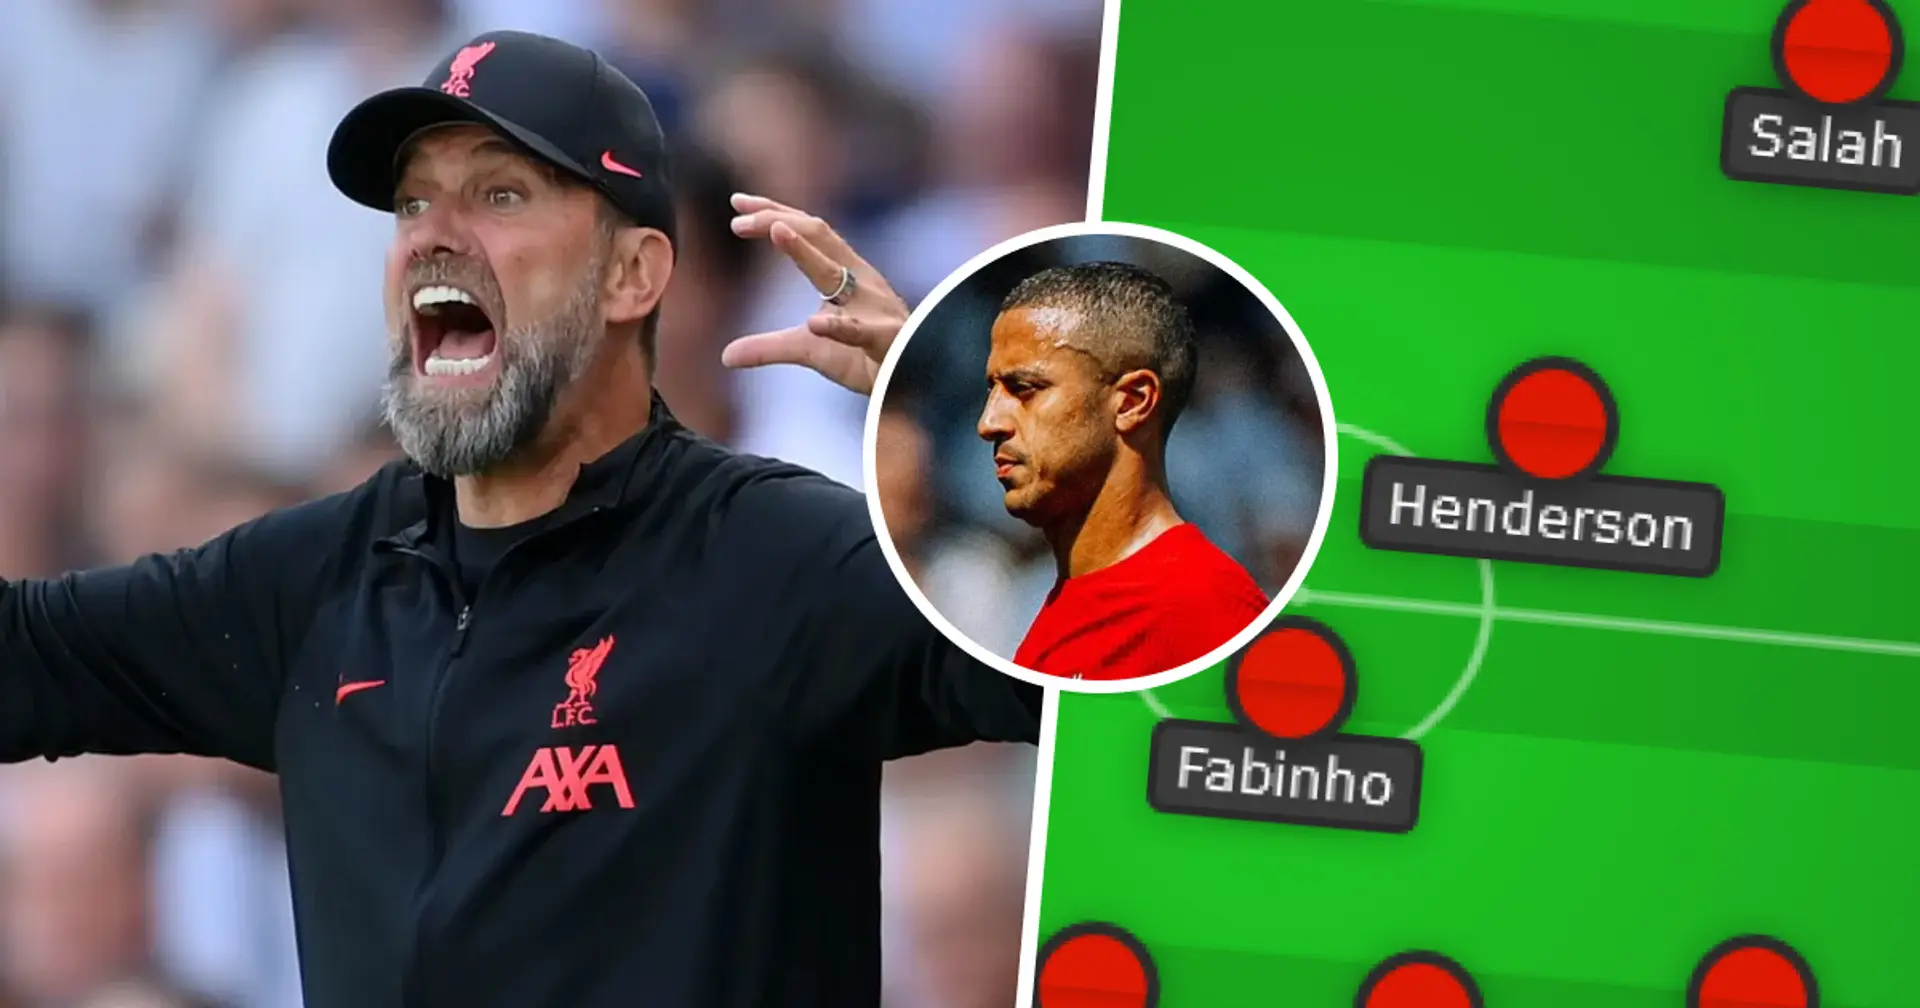 Liverpool's best replacement for injured Thiago shown in lineup